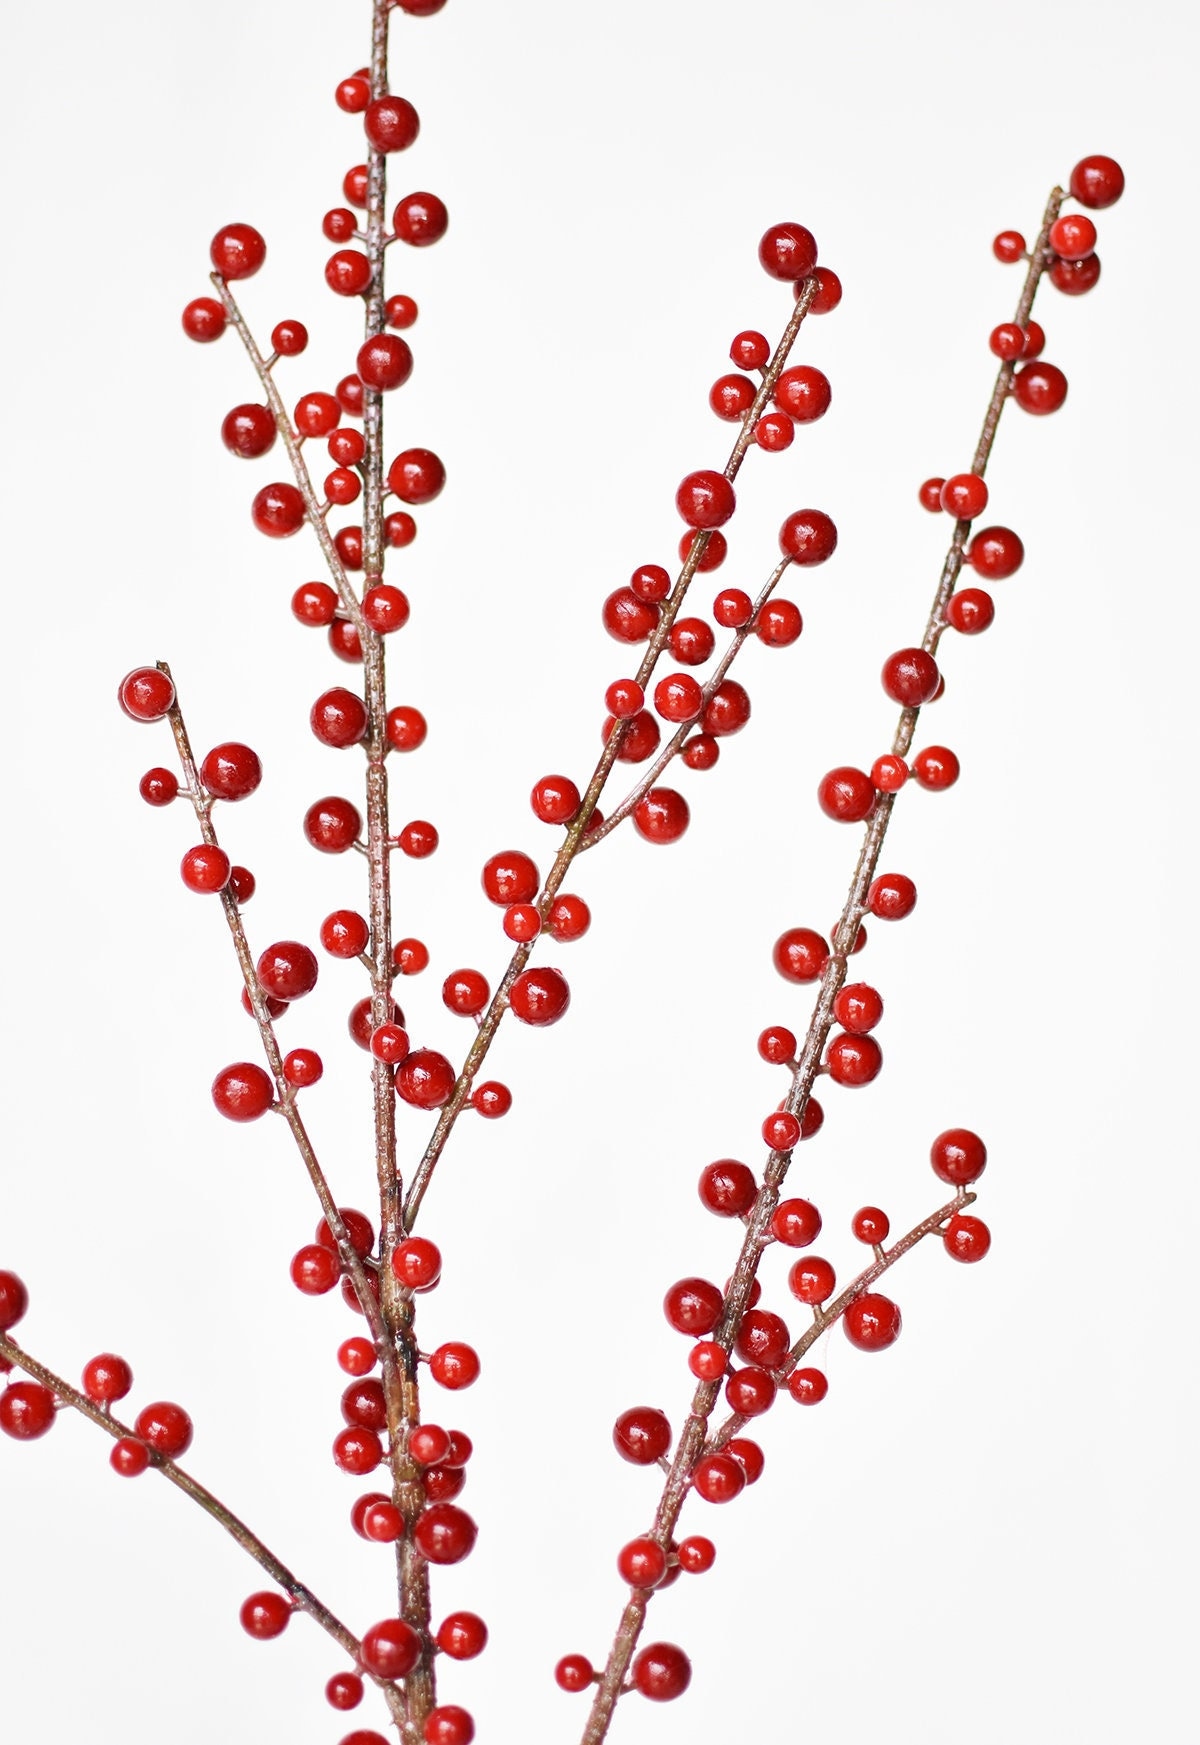 Cluster Berry Stems, Set of Six